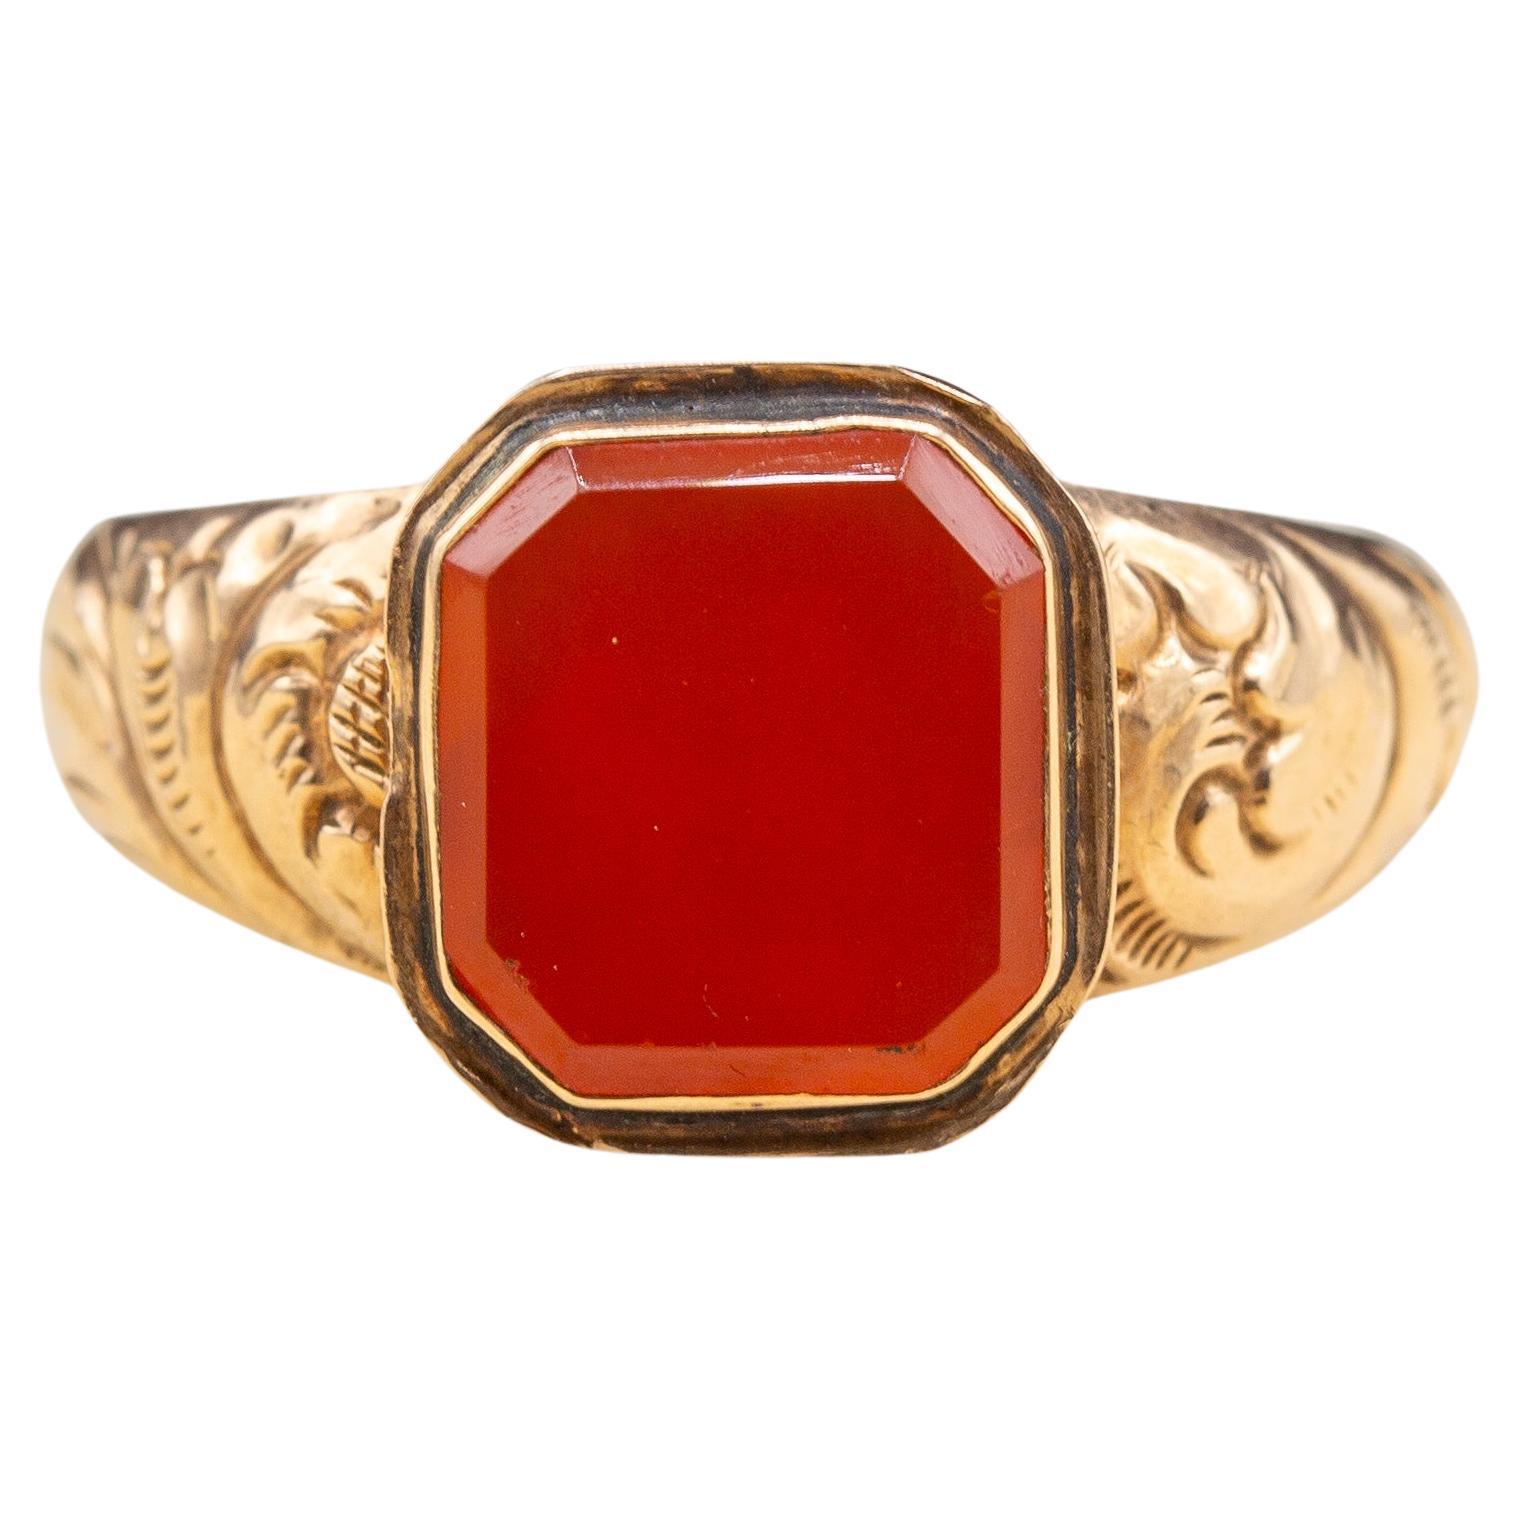 Georgian Gold and Carnelian Signet Ring Large 19th Century Antique Seal Ring  For Sale